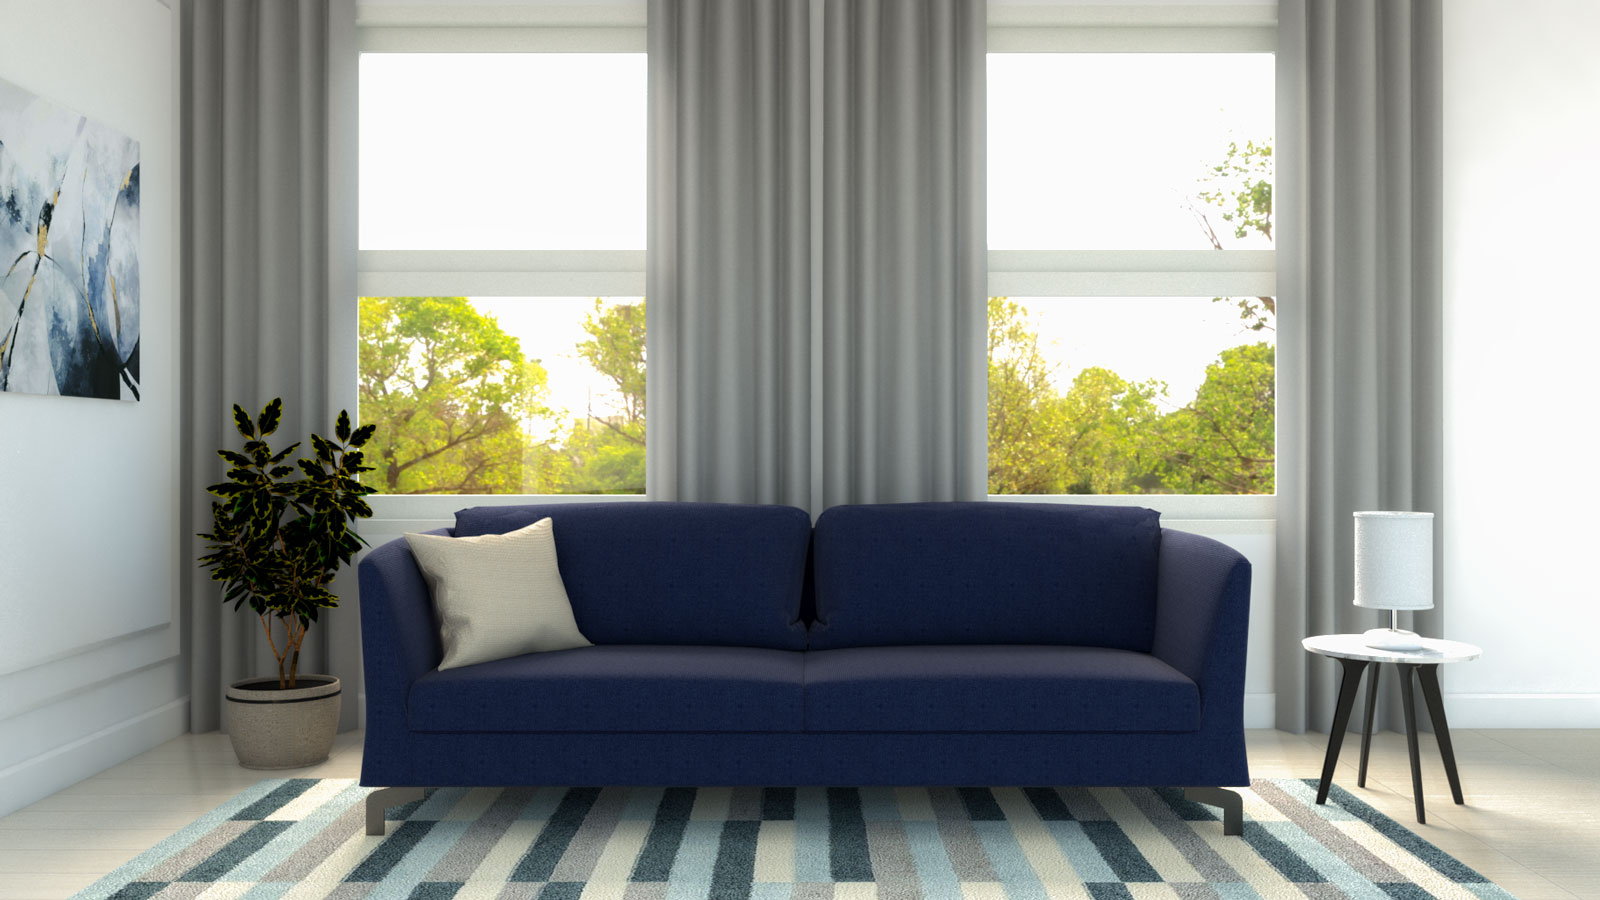 What Color Curtains Go With Blue Couch 10 Interesting Color Ideas Roomdsign Com